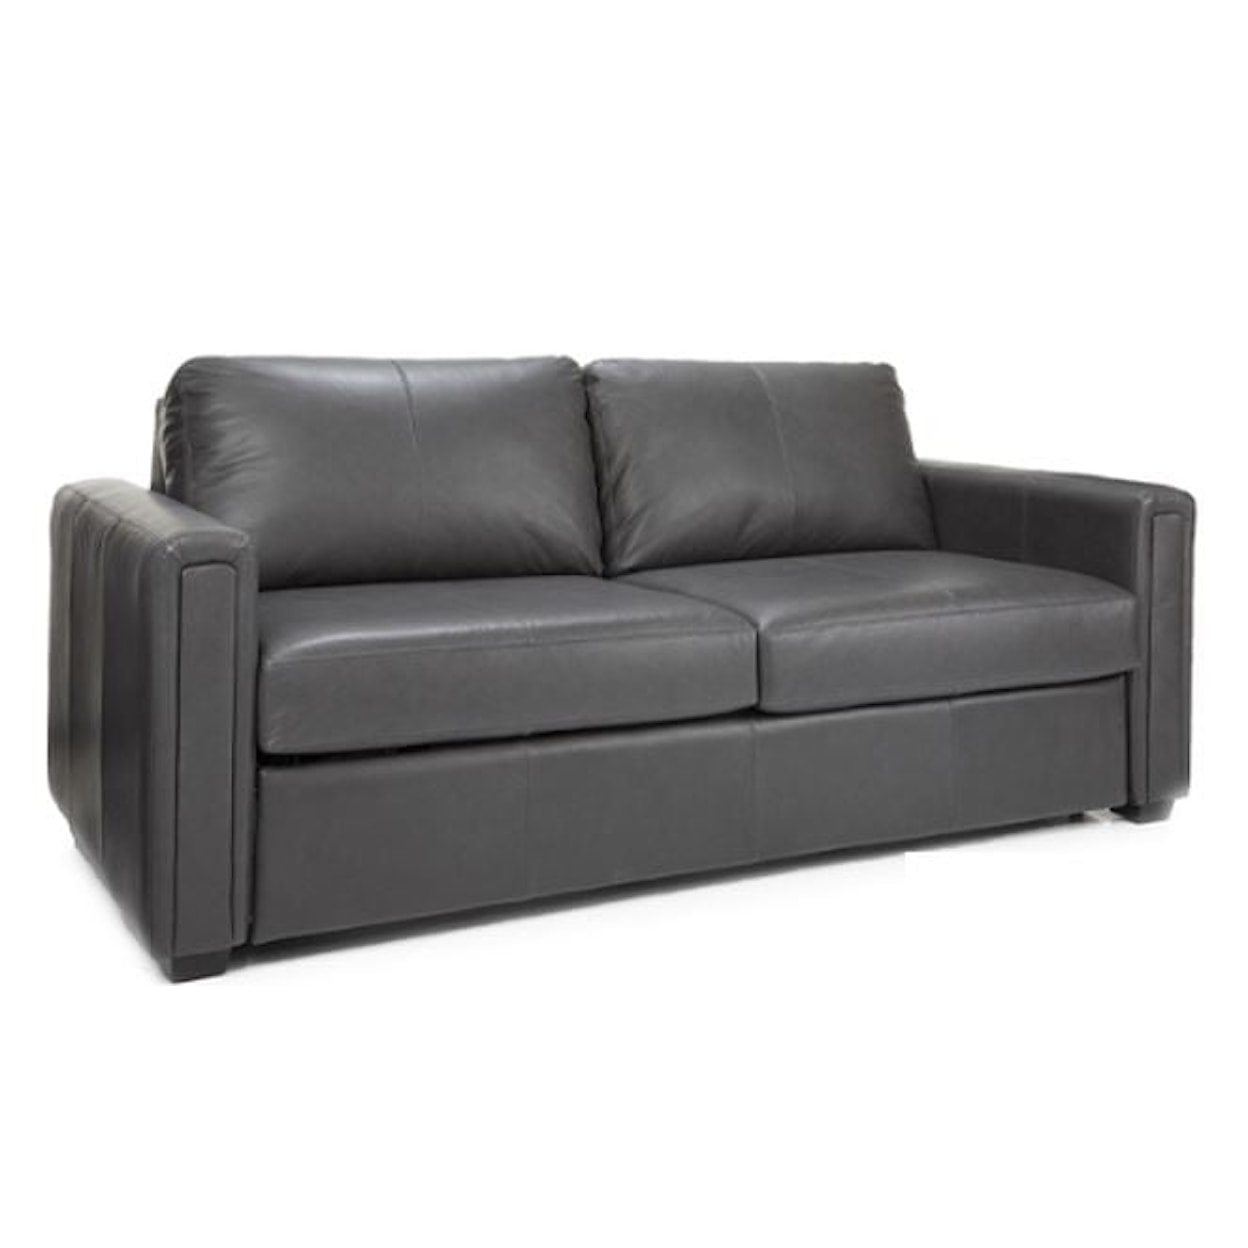 Superstyle L9350 Sofa Bed